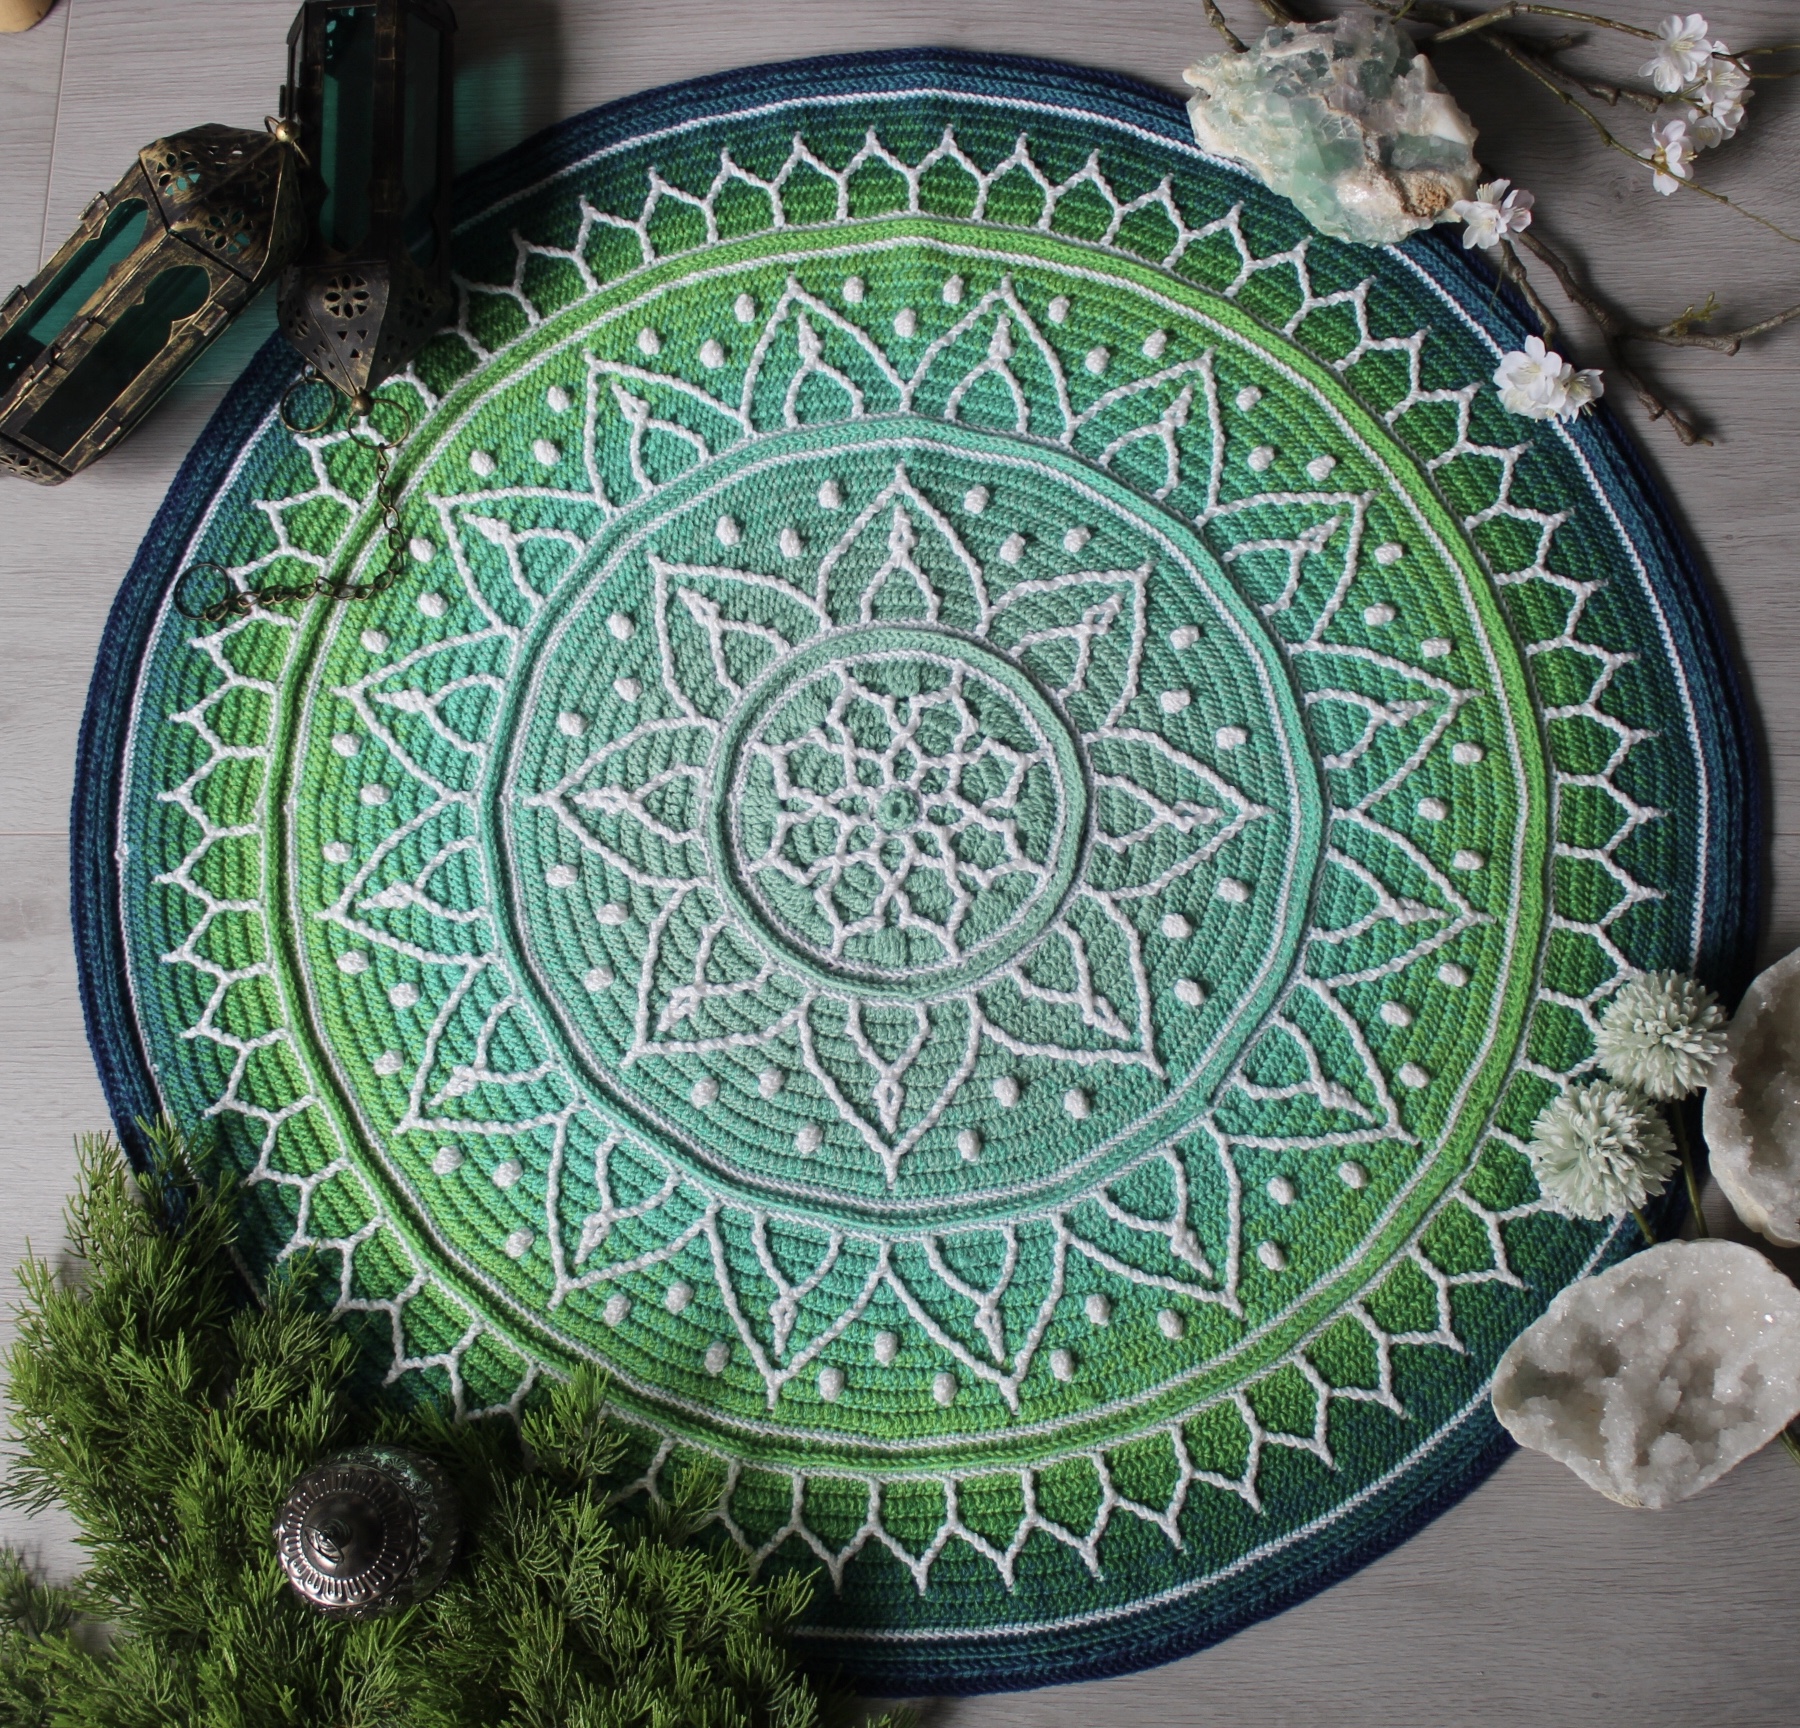 The Indian Flower Rug pattern is now available…